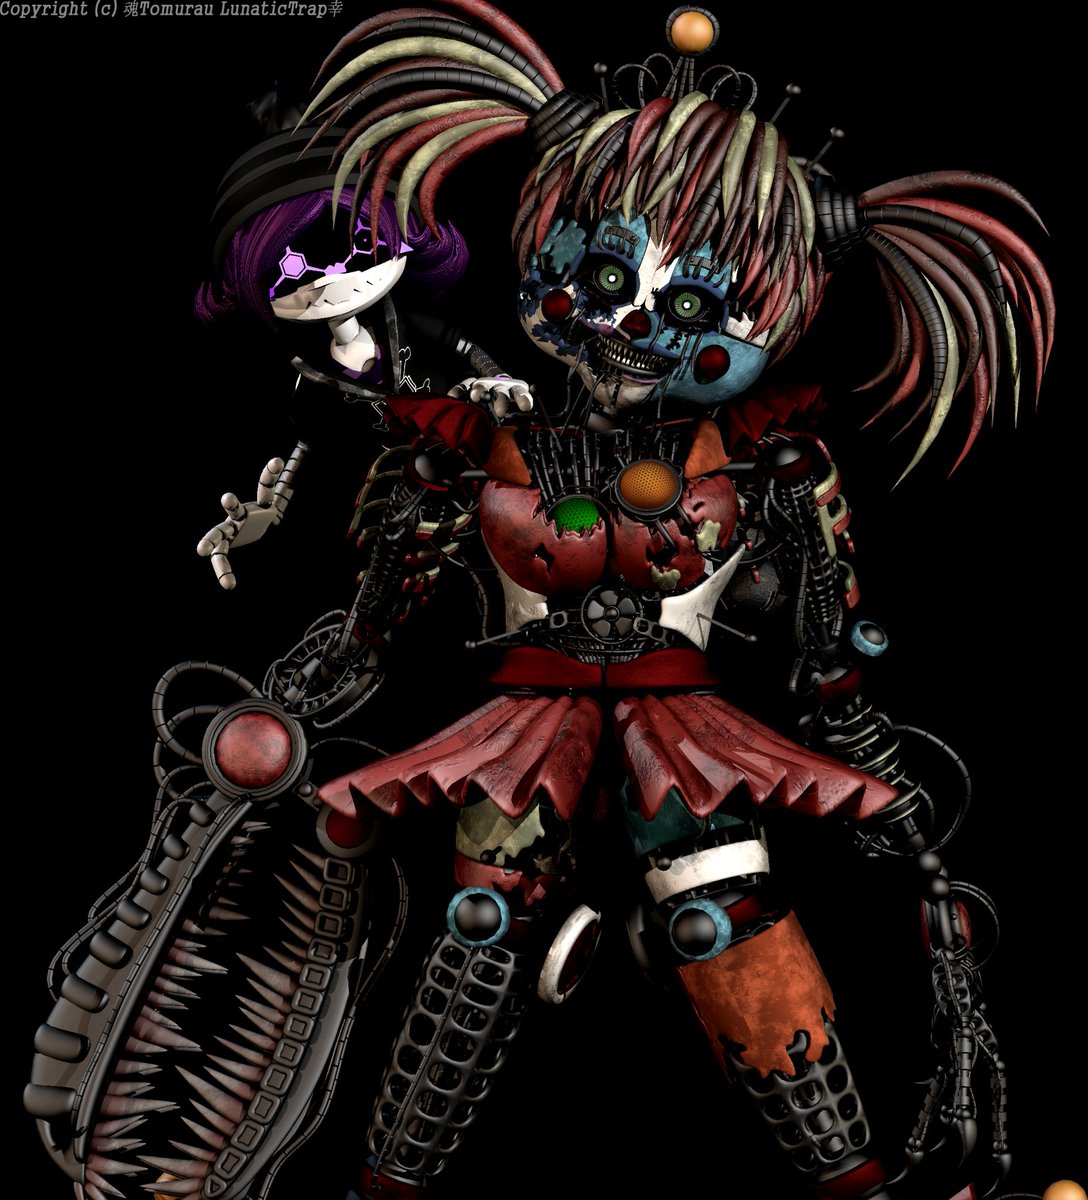 Hello

Here's another illustration from me, Scrapbaby from FNAF and Uzi from Murder Drones

'The Kingslayers'

Uzi model by: @Maki1840155 /Port By: @IanVera13416027

Enjoy 🖤✡

#murderdronesfannart #murderdrones #FNaF #fnaffanart #fnafart #circusbaby #FFPS #art #artwork #3dart